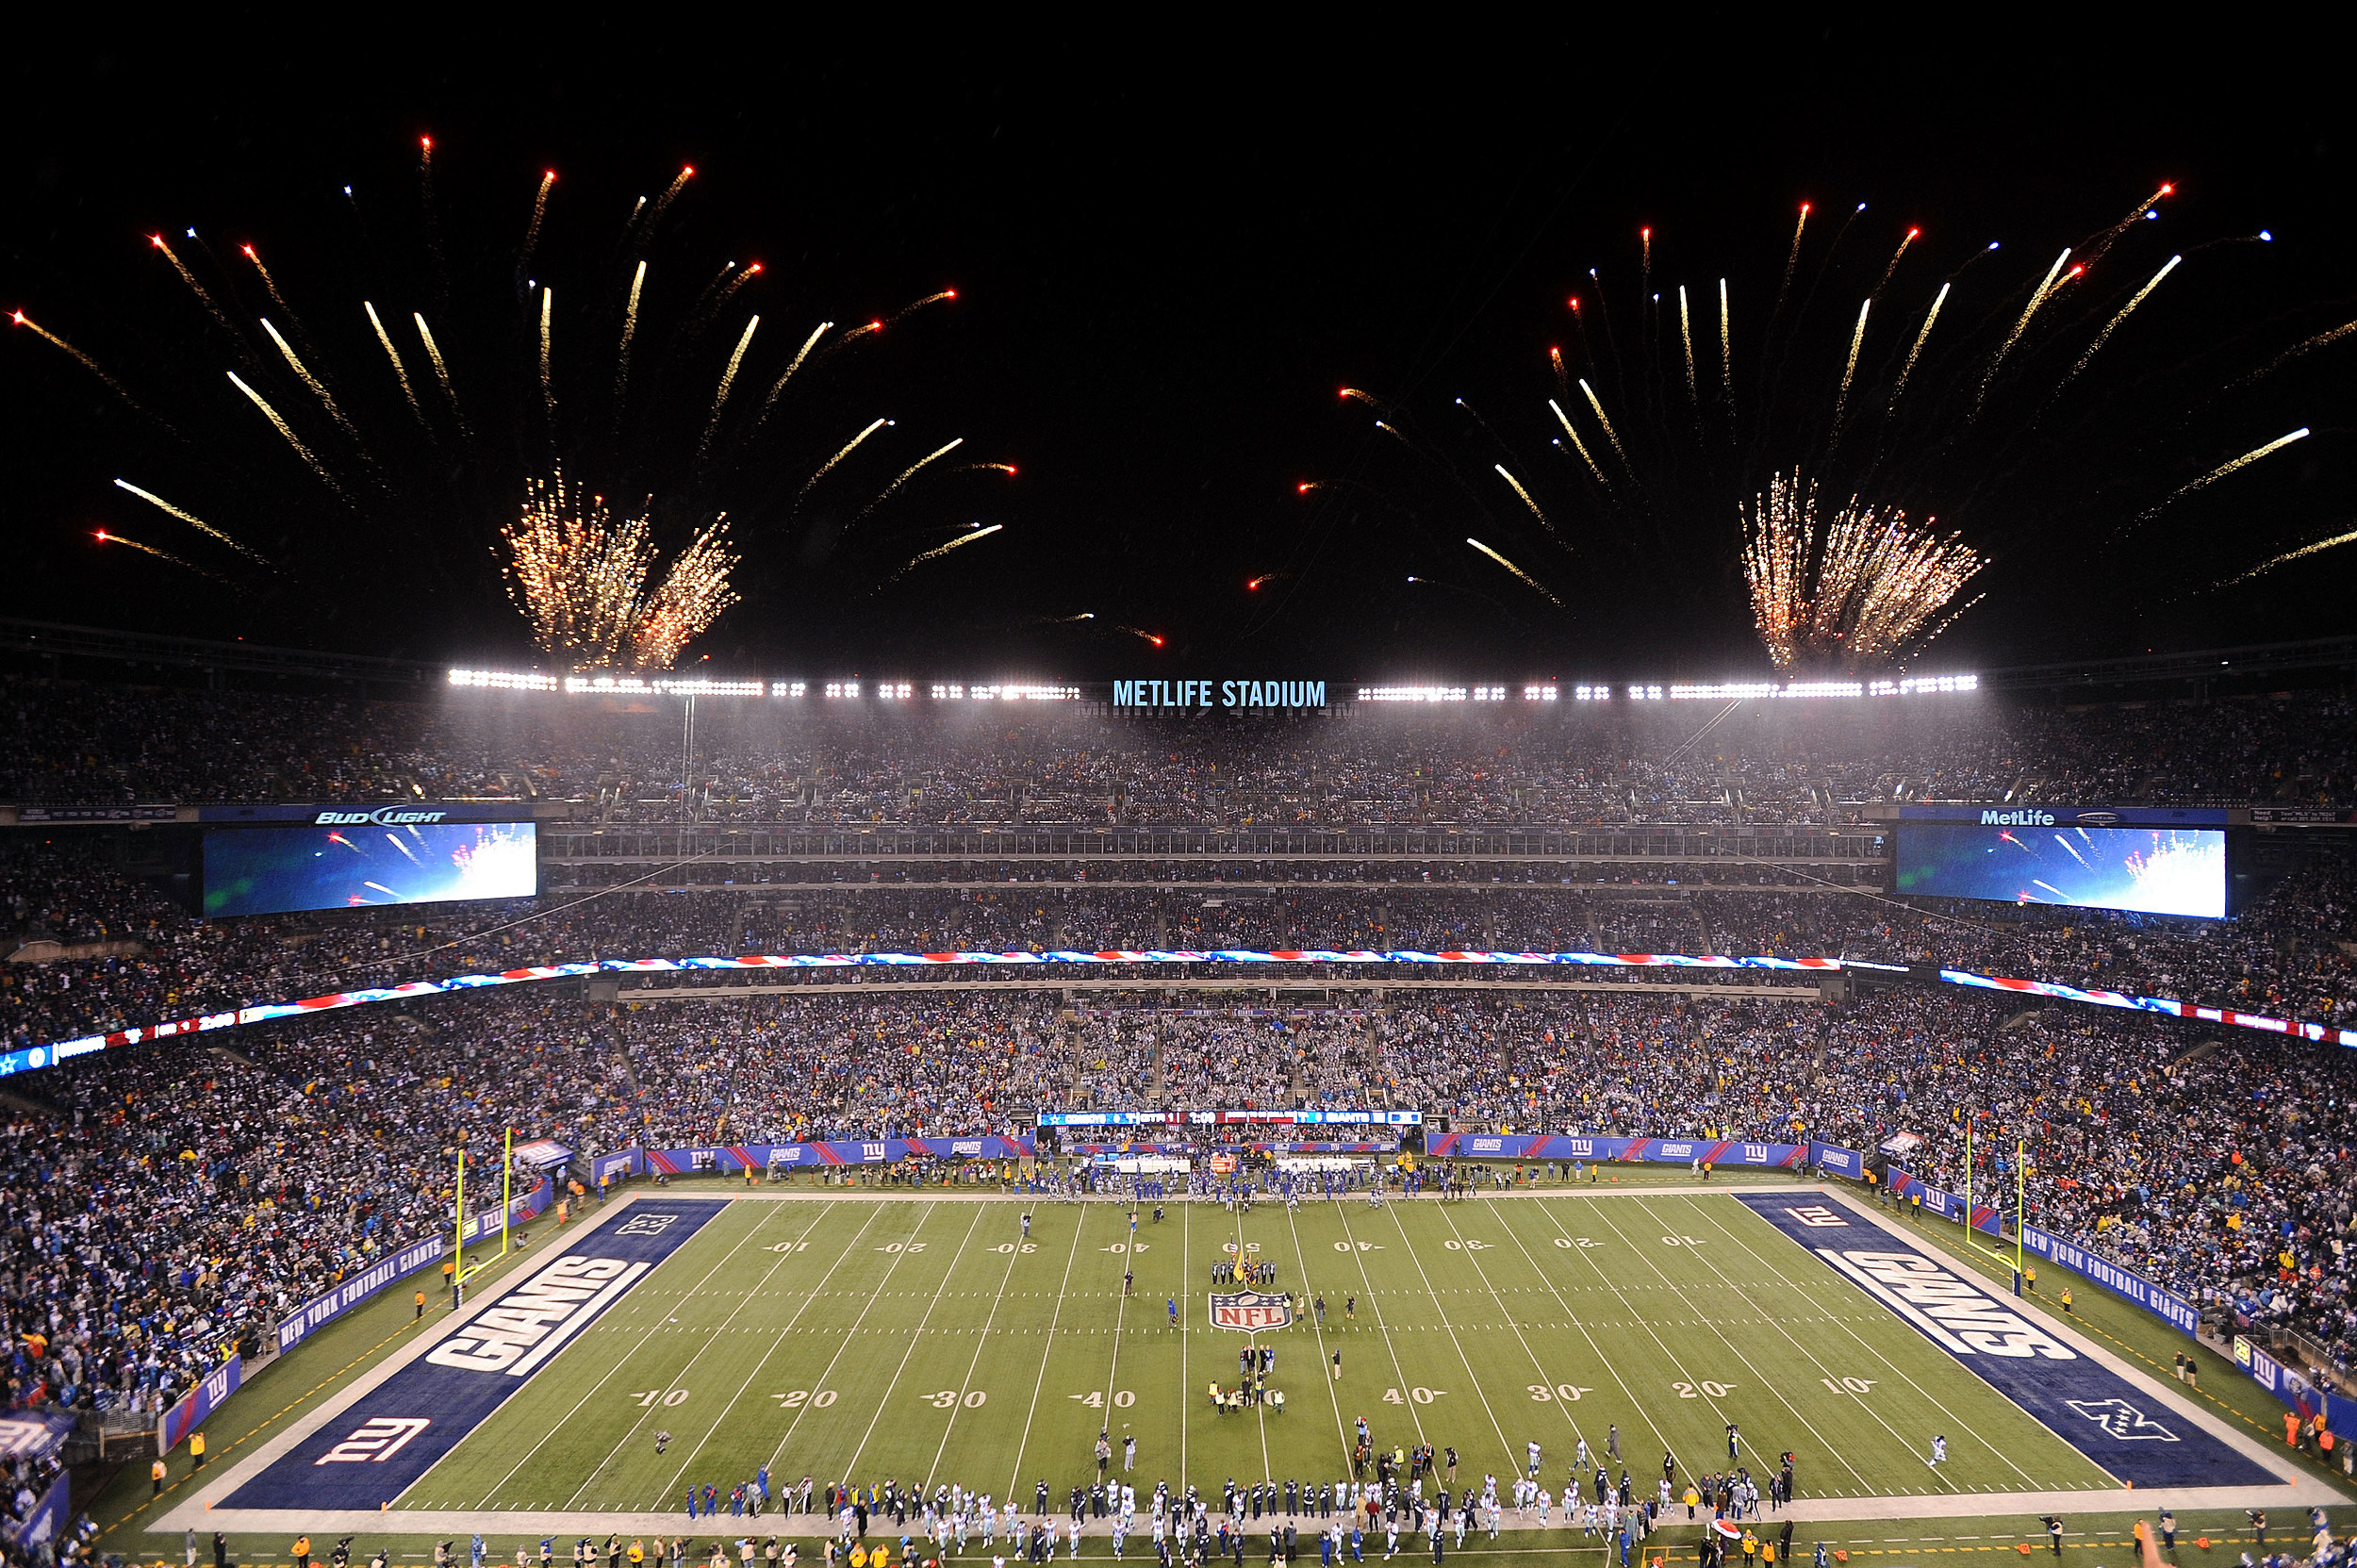 New York Giants: MetLife Stadium, Meadowlands Sports Complex in East Rutherford, New Jersey. 2500x1670 HD Wallpaper.